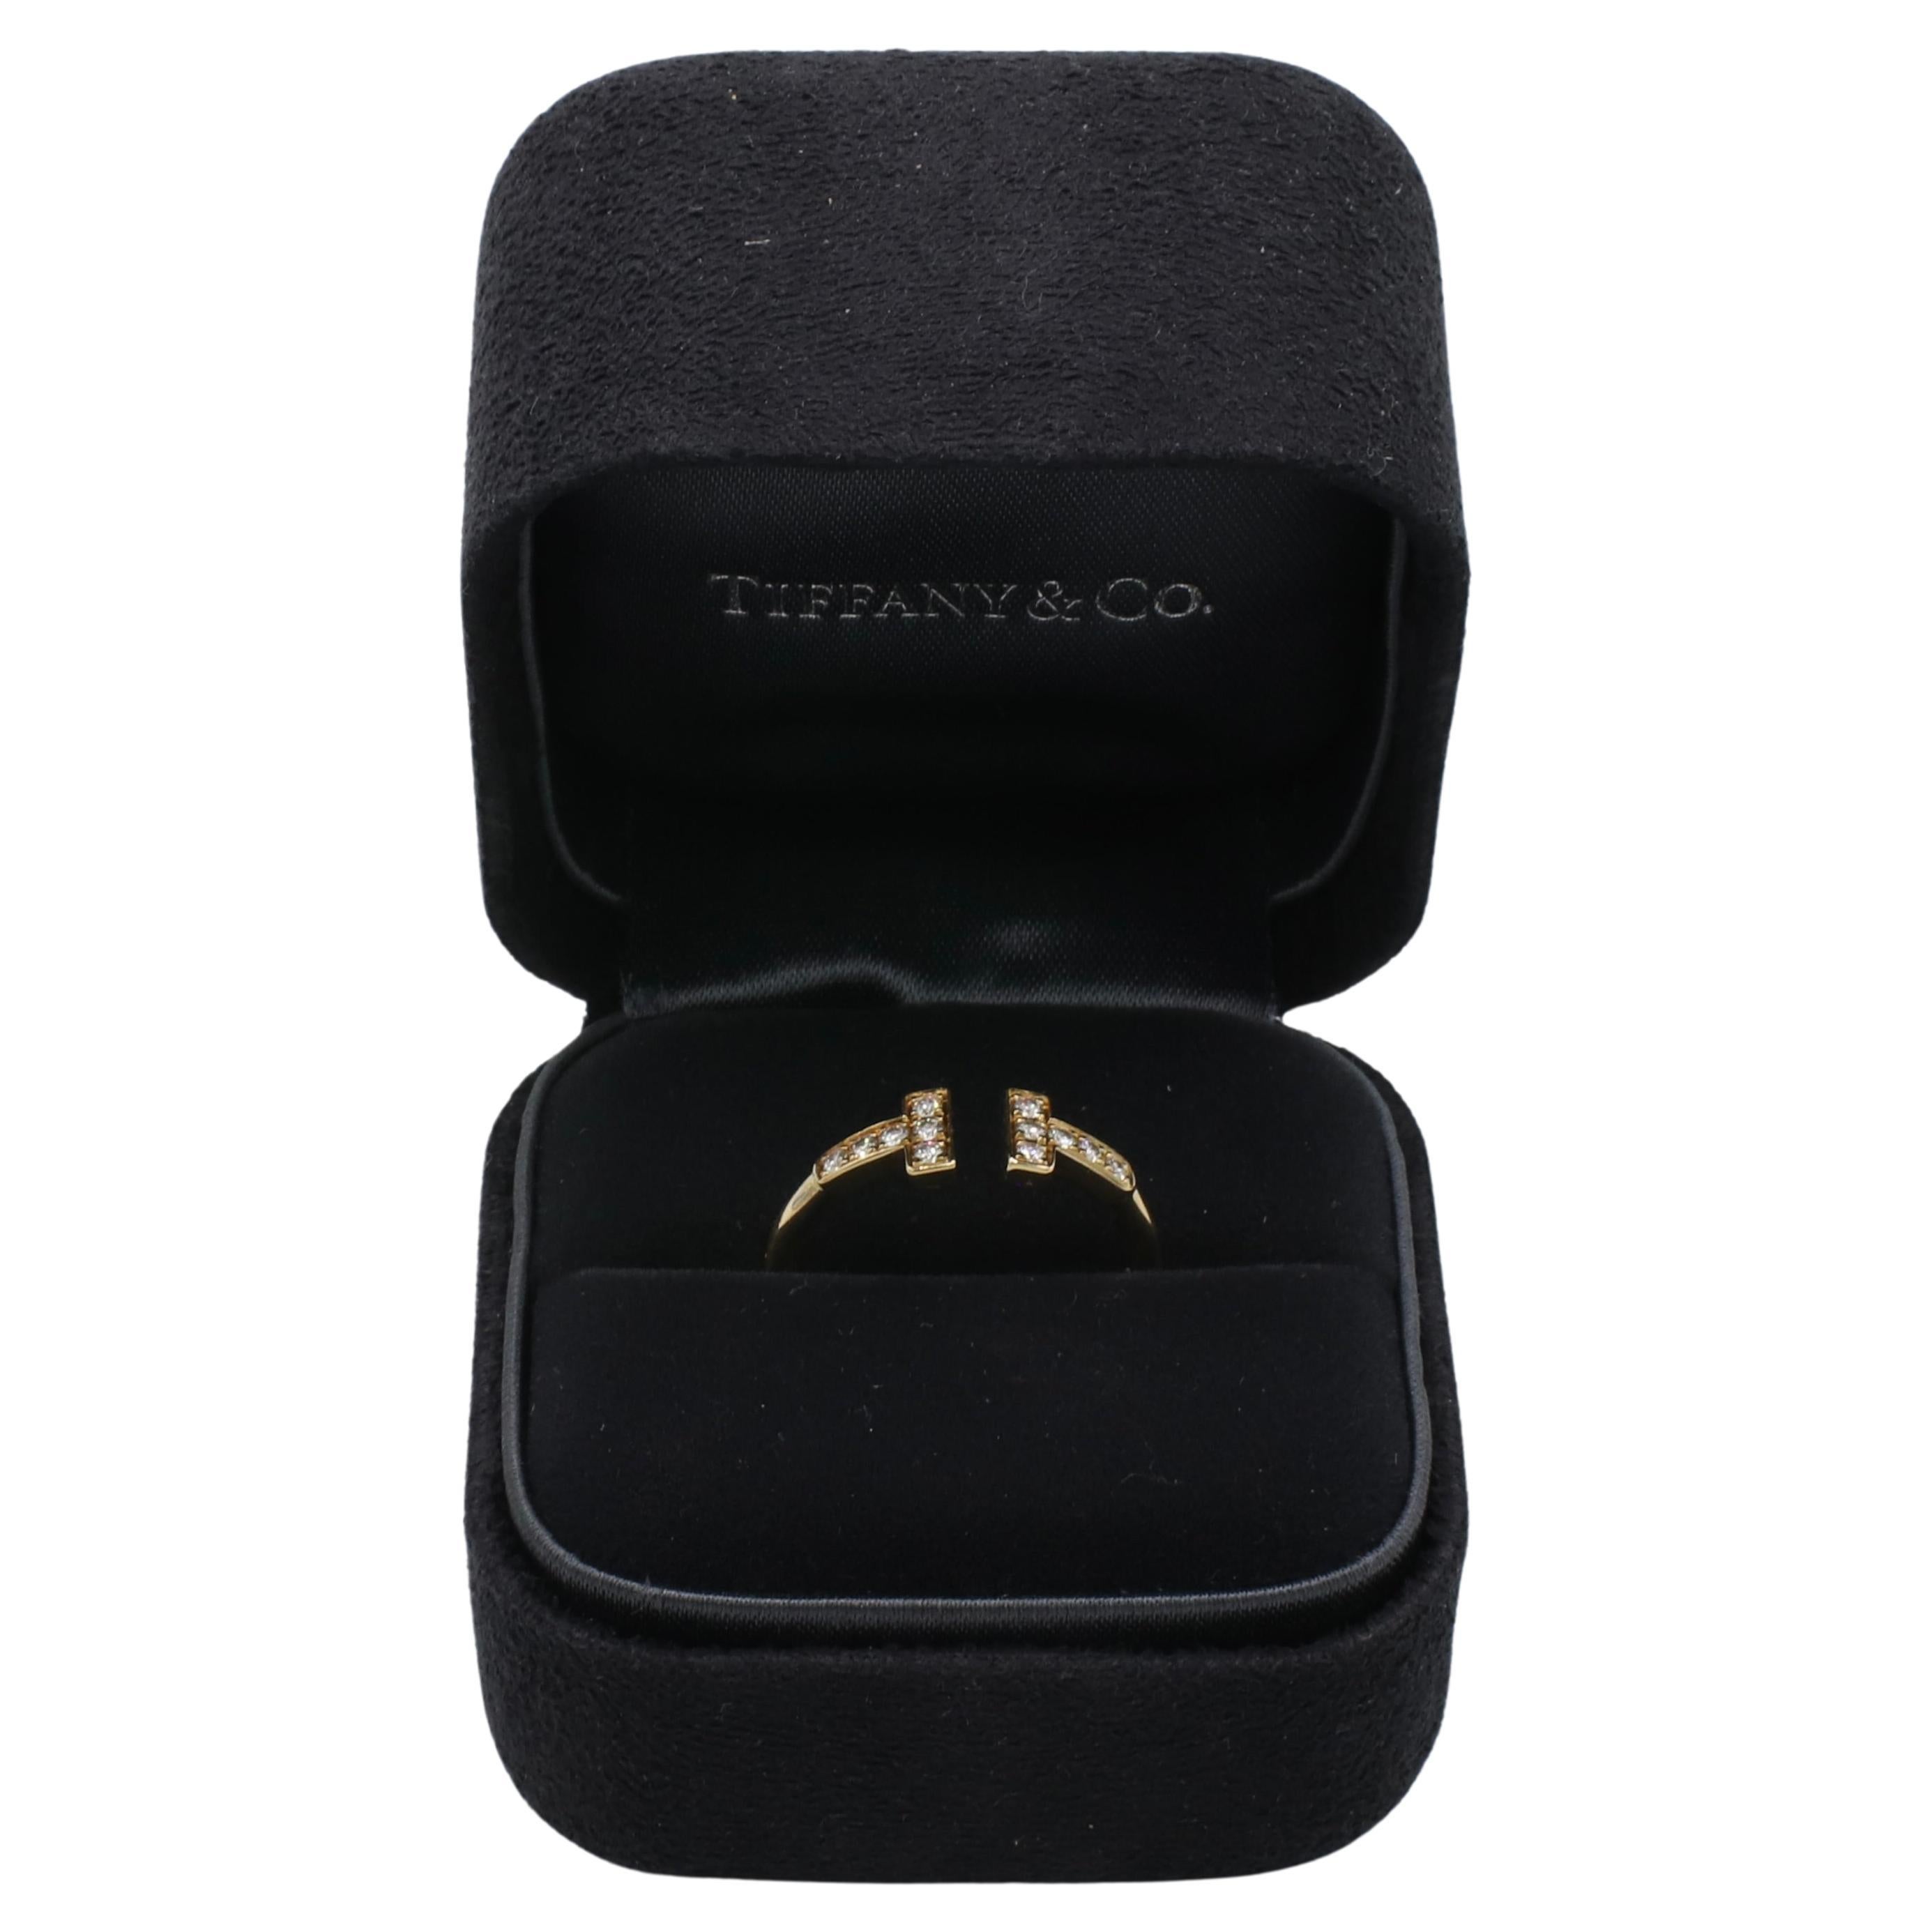 Tiffany & Co. Tiffany T Wire 18 Karat Yellow Gold Natural Diamond Ring 
Metal: 18k yellow gold
Weight: 2.48 grams
Diamonds:  0.13 CTW round natural diamonds F-G VS
Size: 6.5 (US)
Signed: ©T&Co. Au750 ITALY
Retail: $2,675 USD
